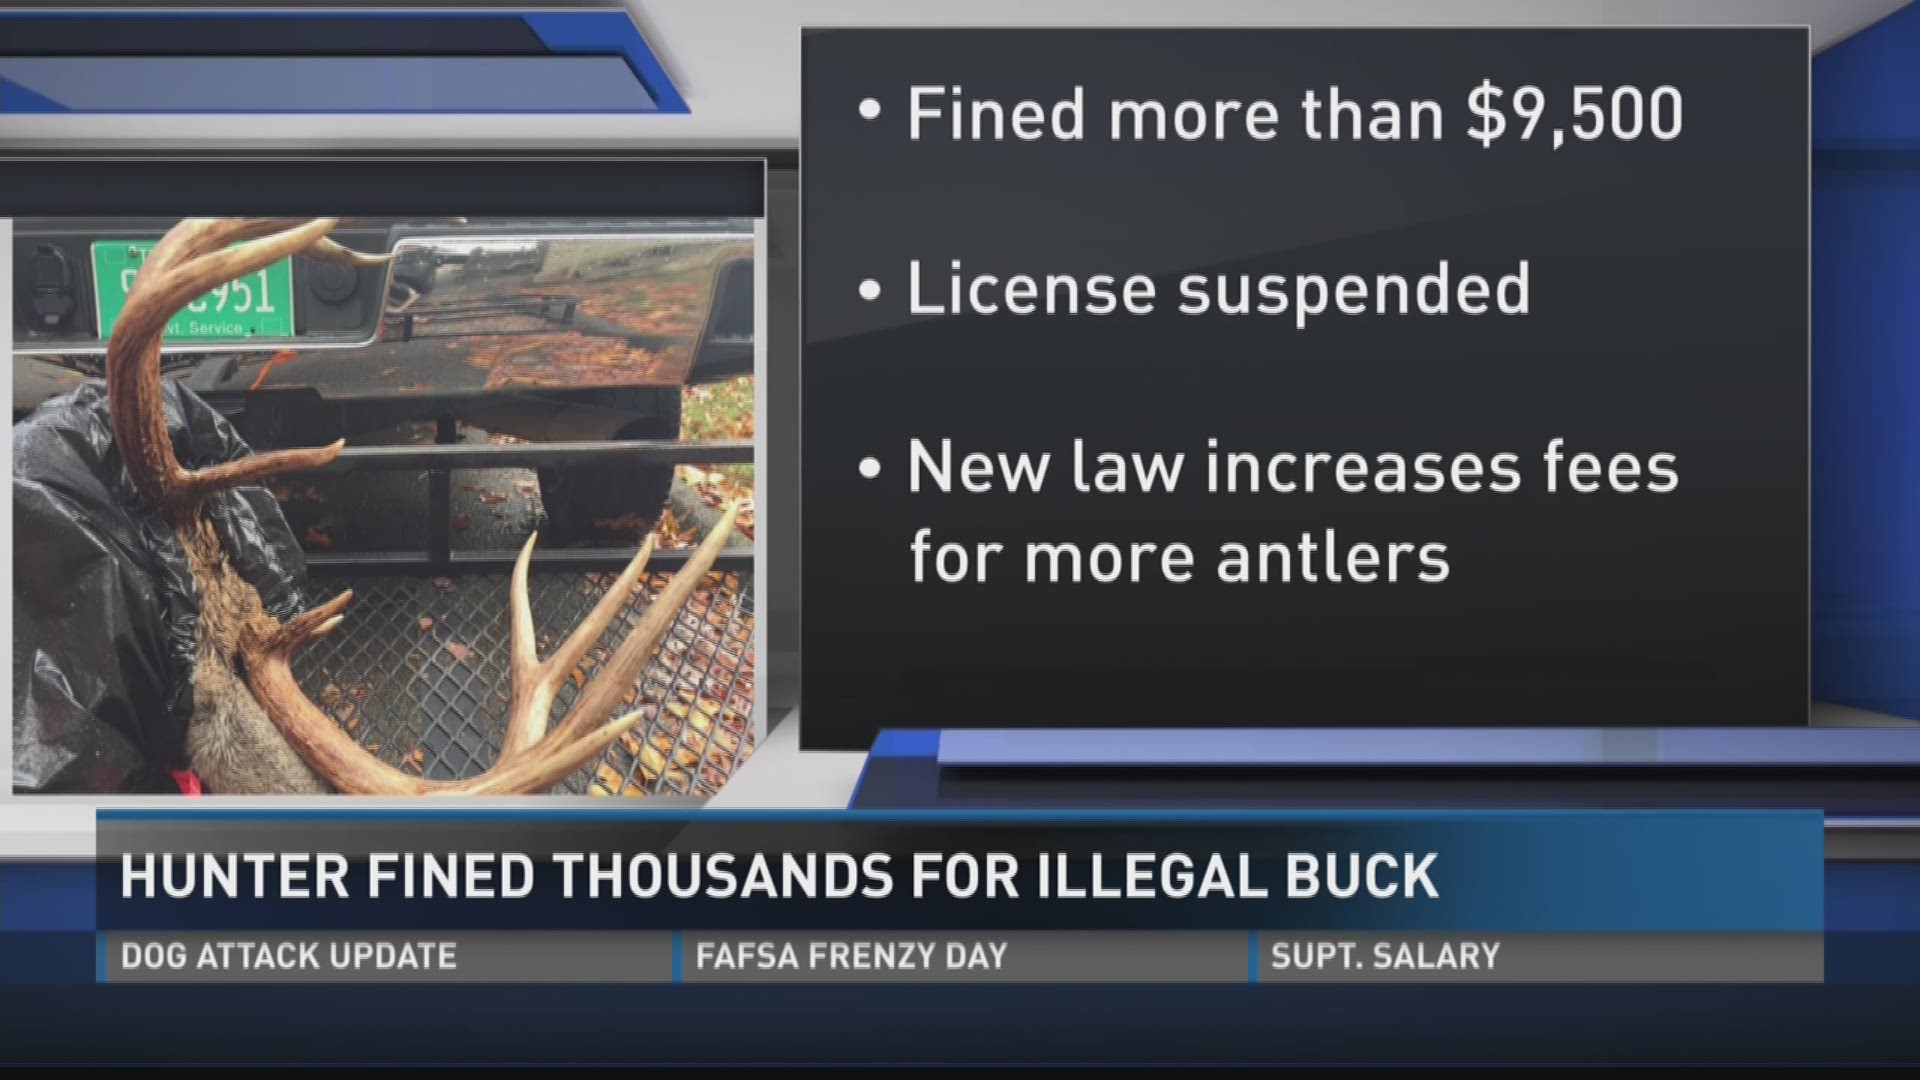 A Jefferson County man's decision to illegally kill a big buck meant a hefty fine under recently changed legislation.